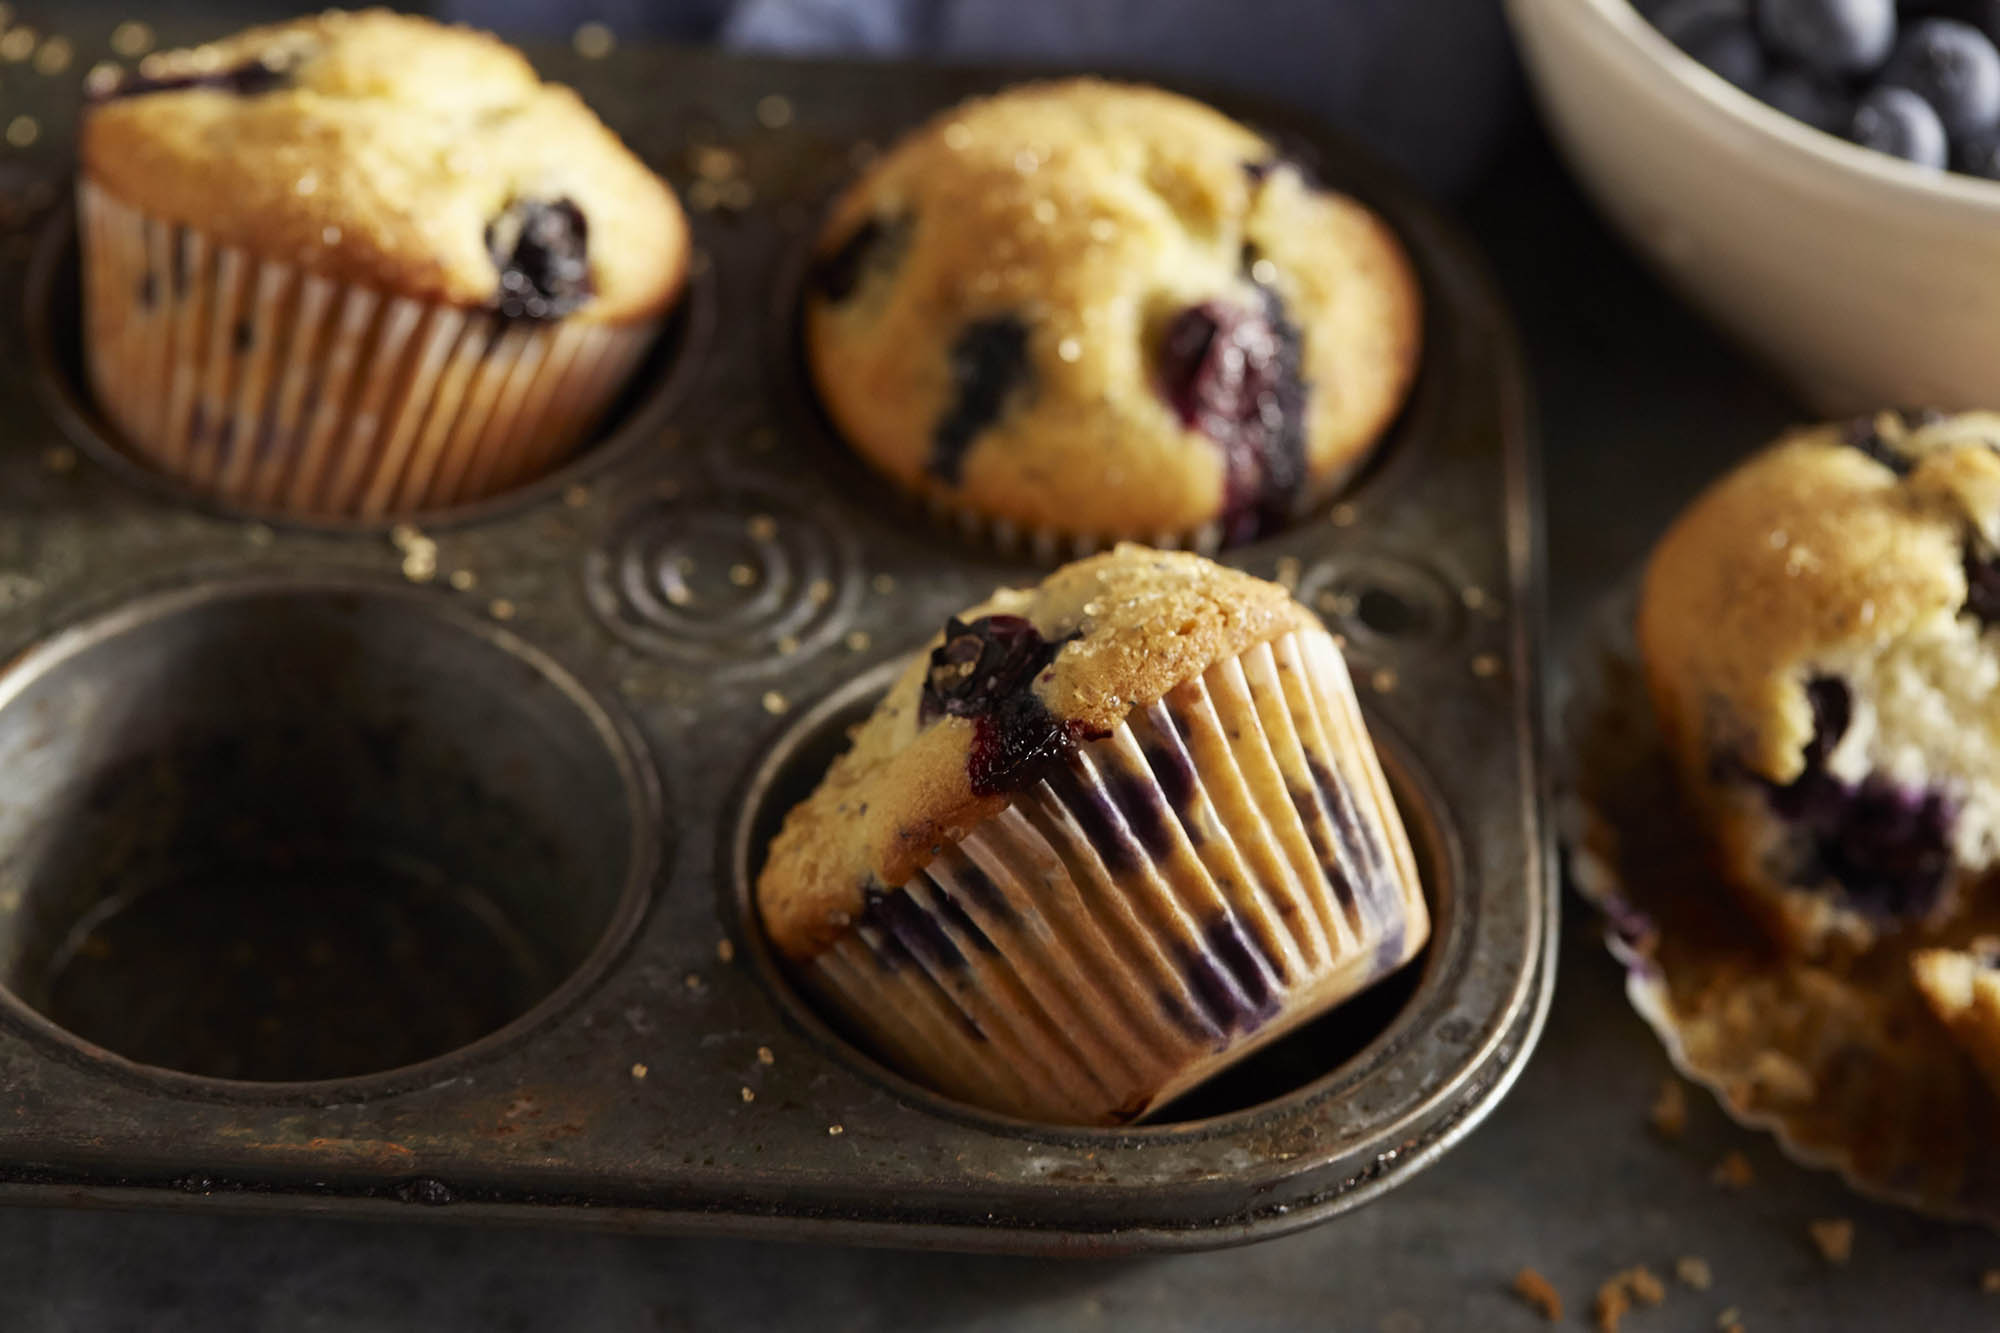 https://driscolls.imgix.net/-/media/assets/recipes/easy-blueberry-muffins.ashx